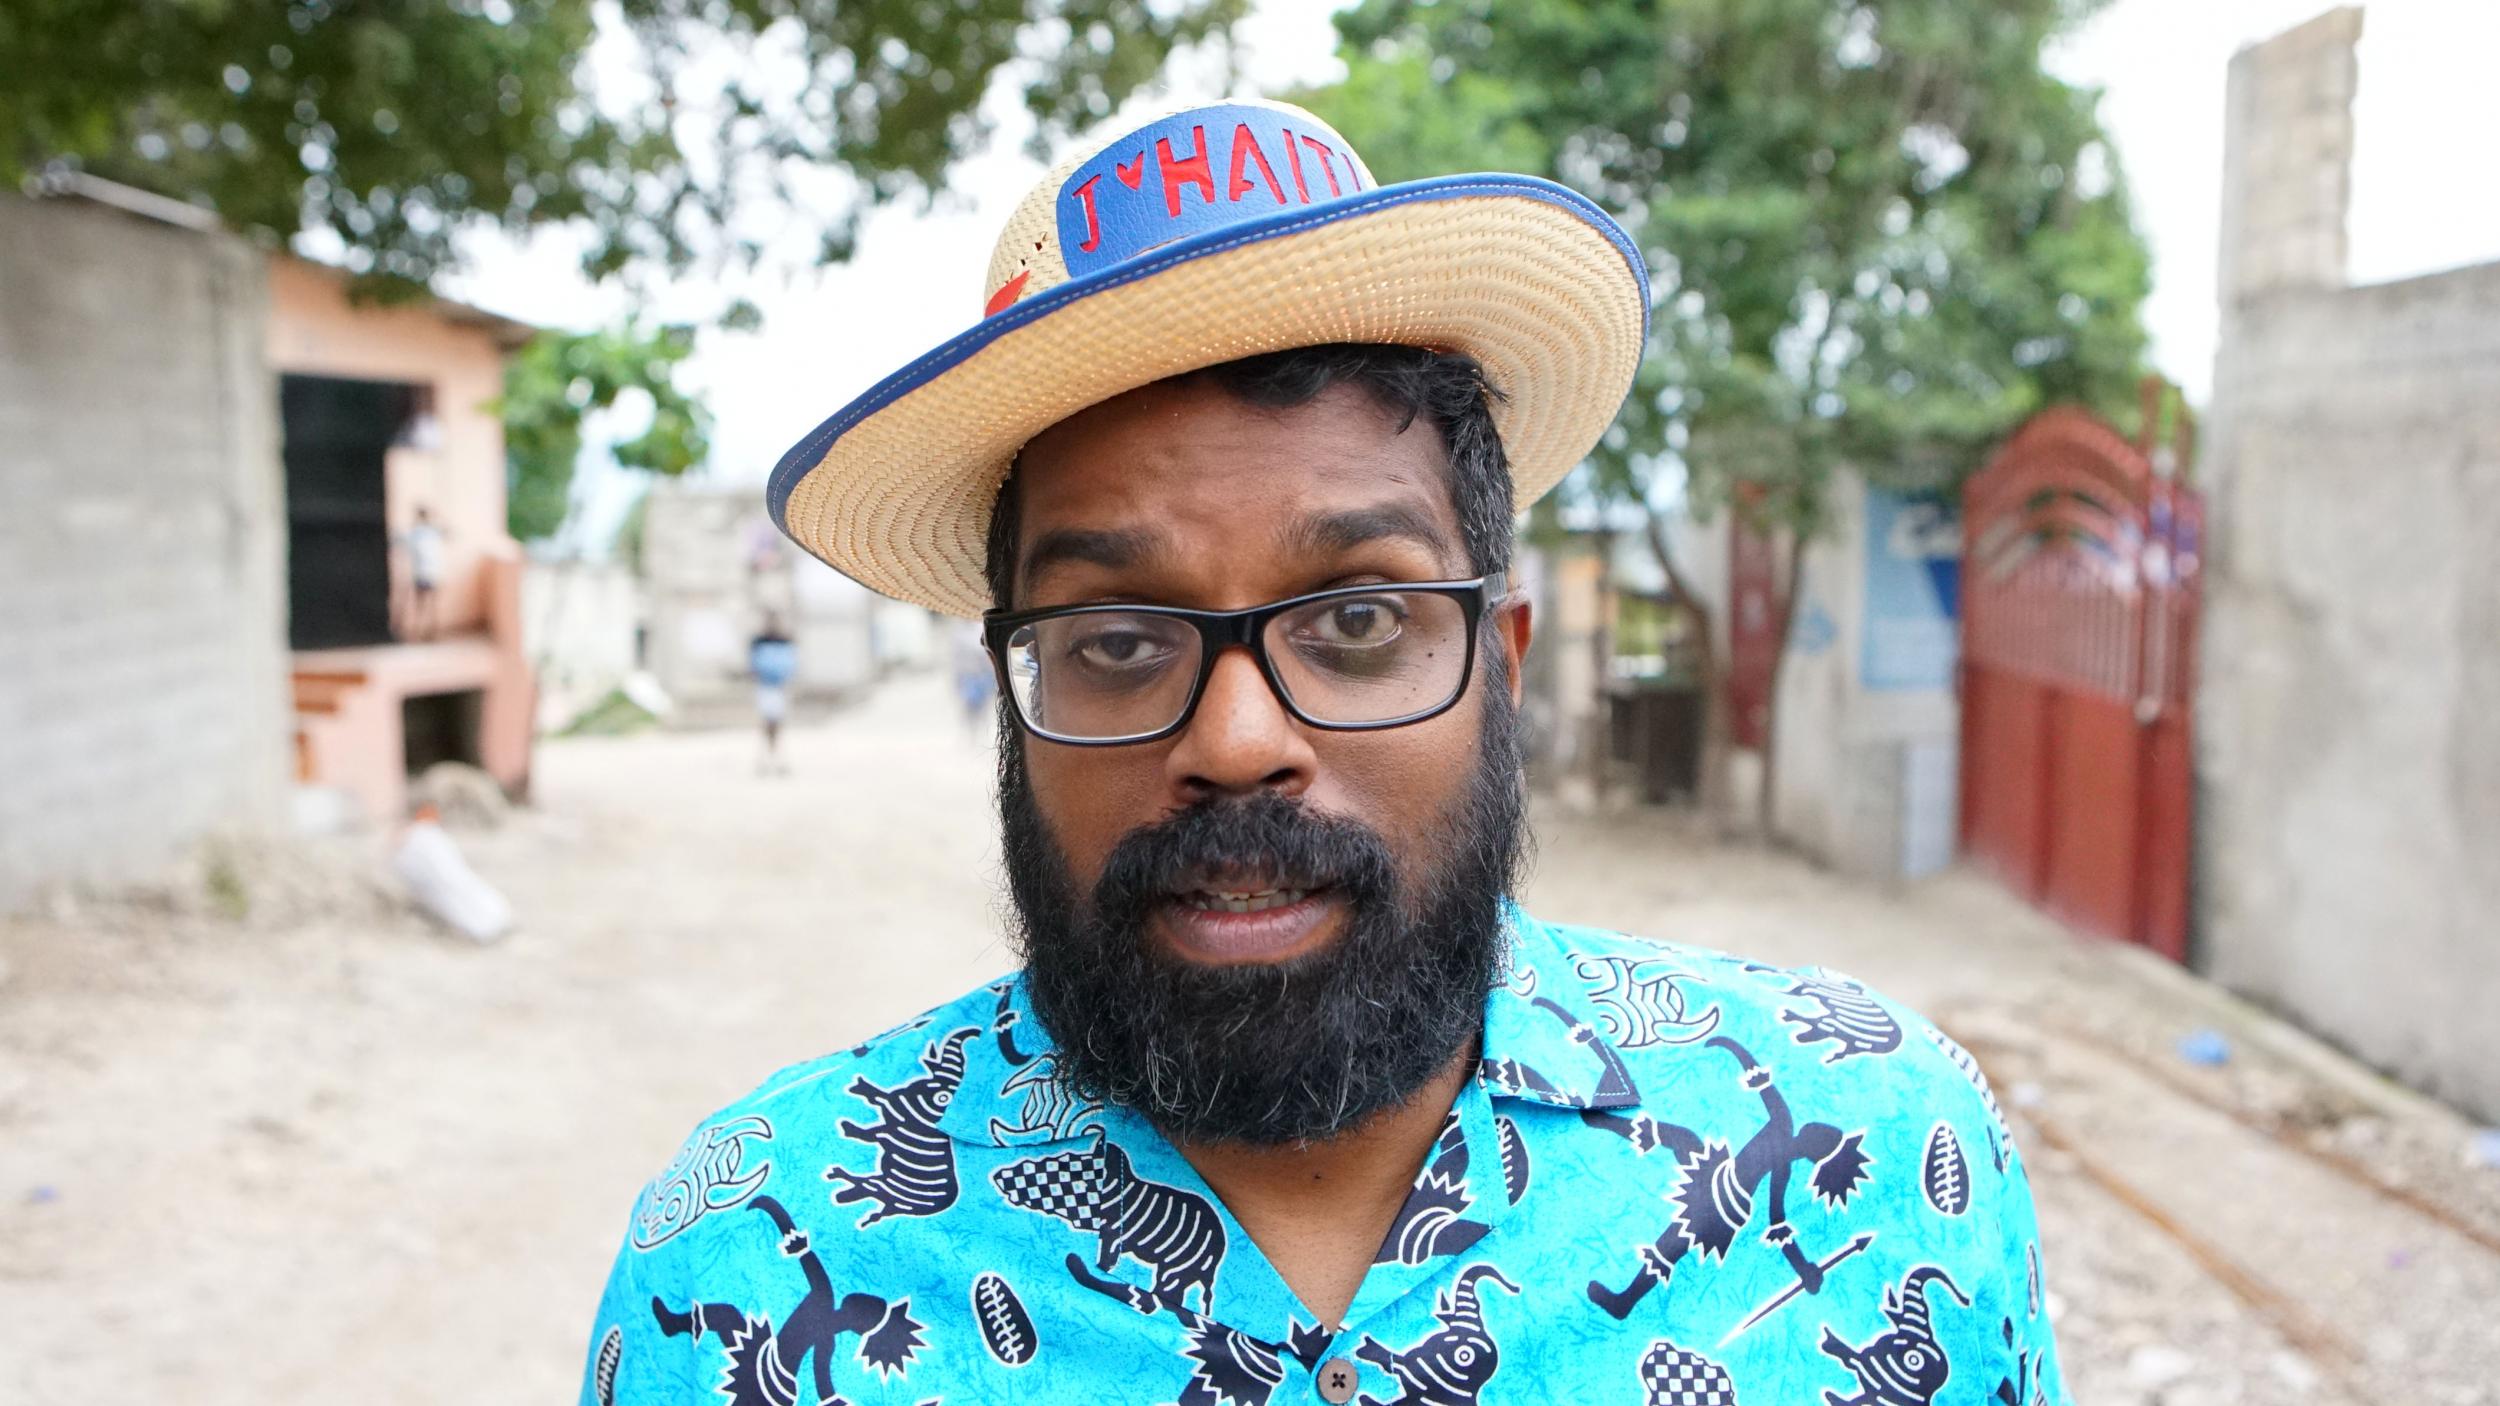 Romesh Ranganathan finds himself in Haiti for the first episode of his new series